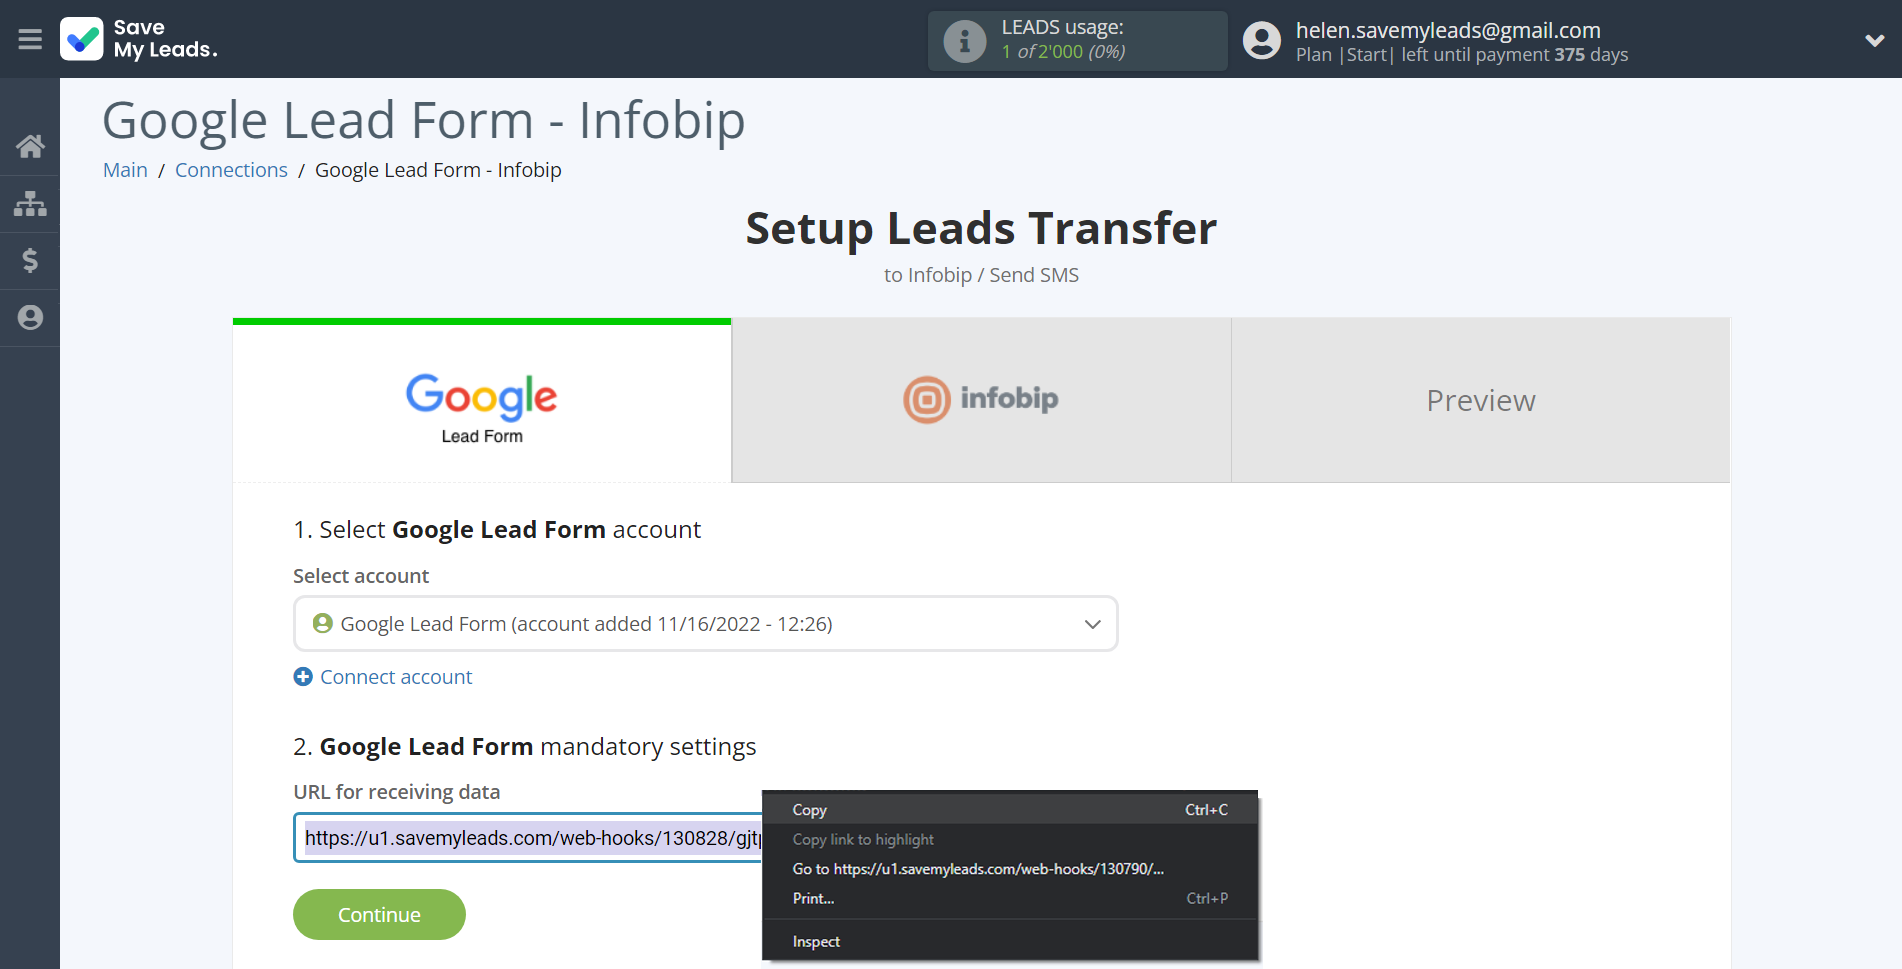 How to Connect Google Lead Form with Infobip | Data Source account connection